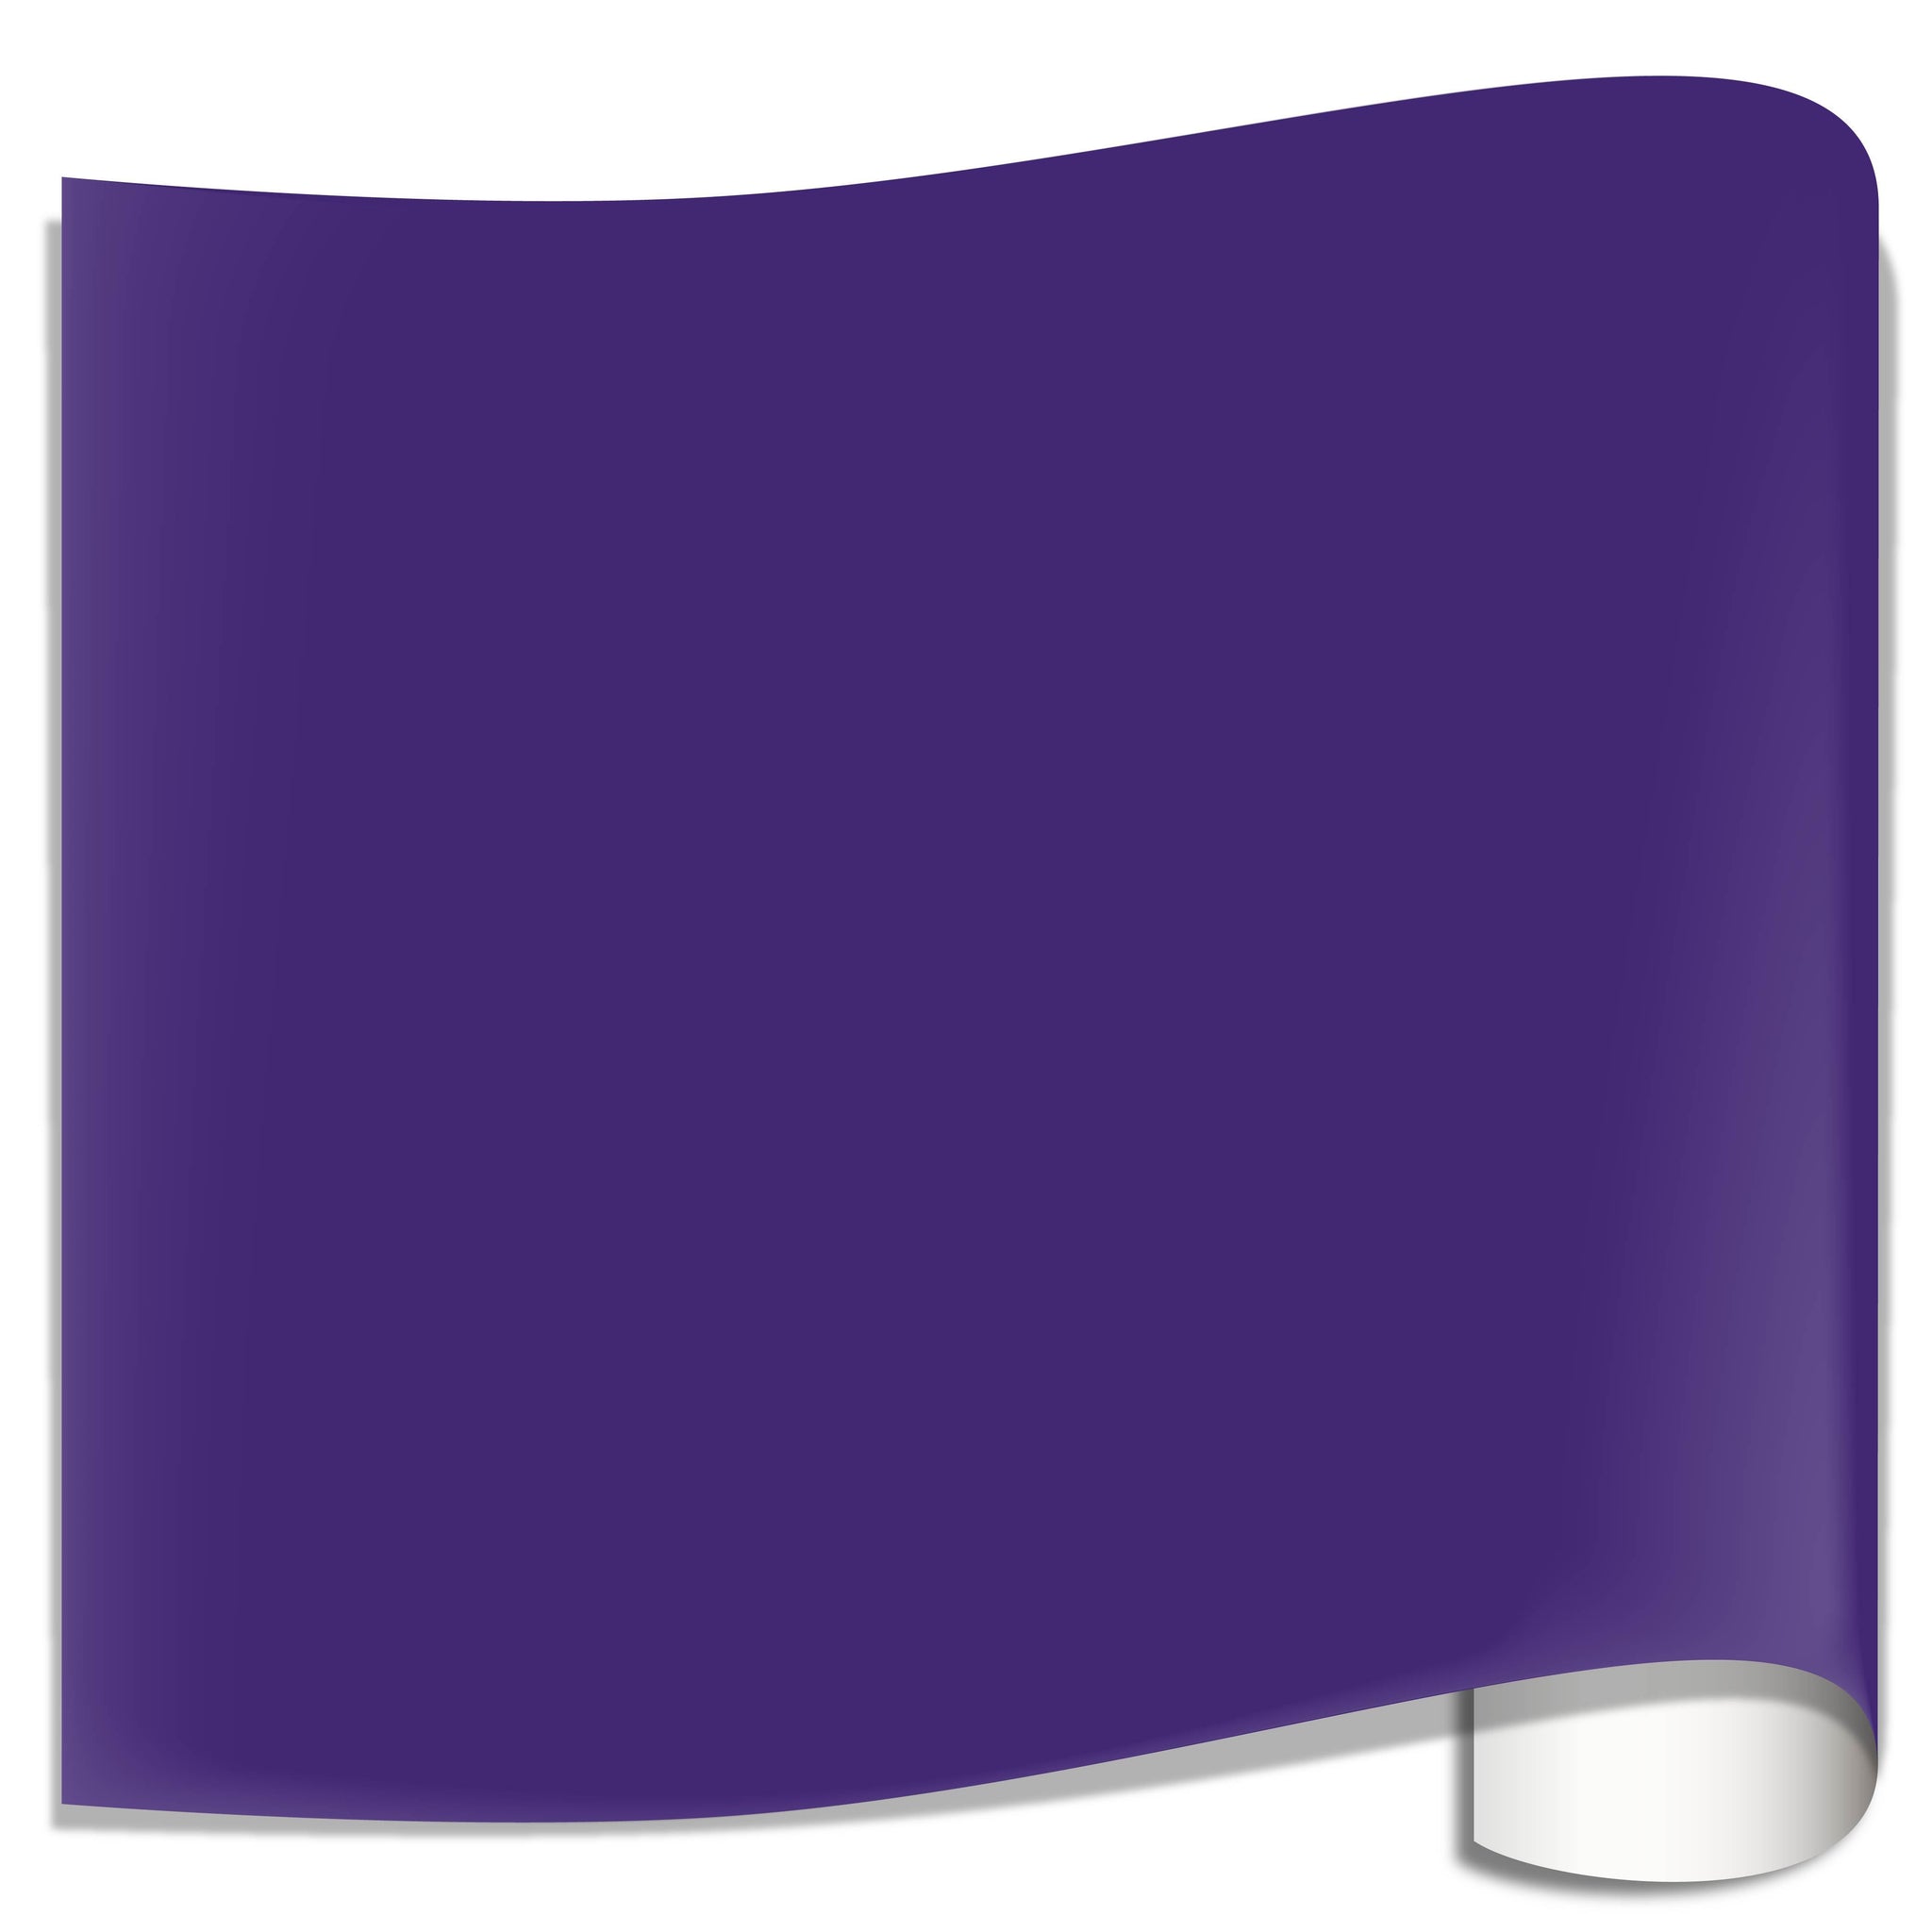  Oracal 651 Glossy Permanent Vinyl 12 Inch x 6 Feet - Royal  Purple : Arts, Crafts & Sewing